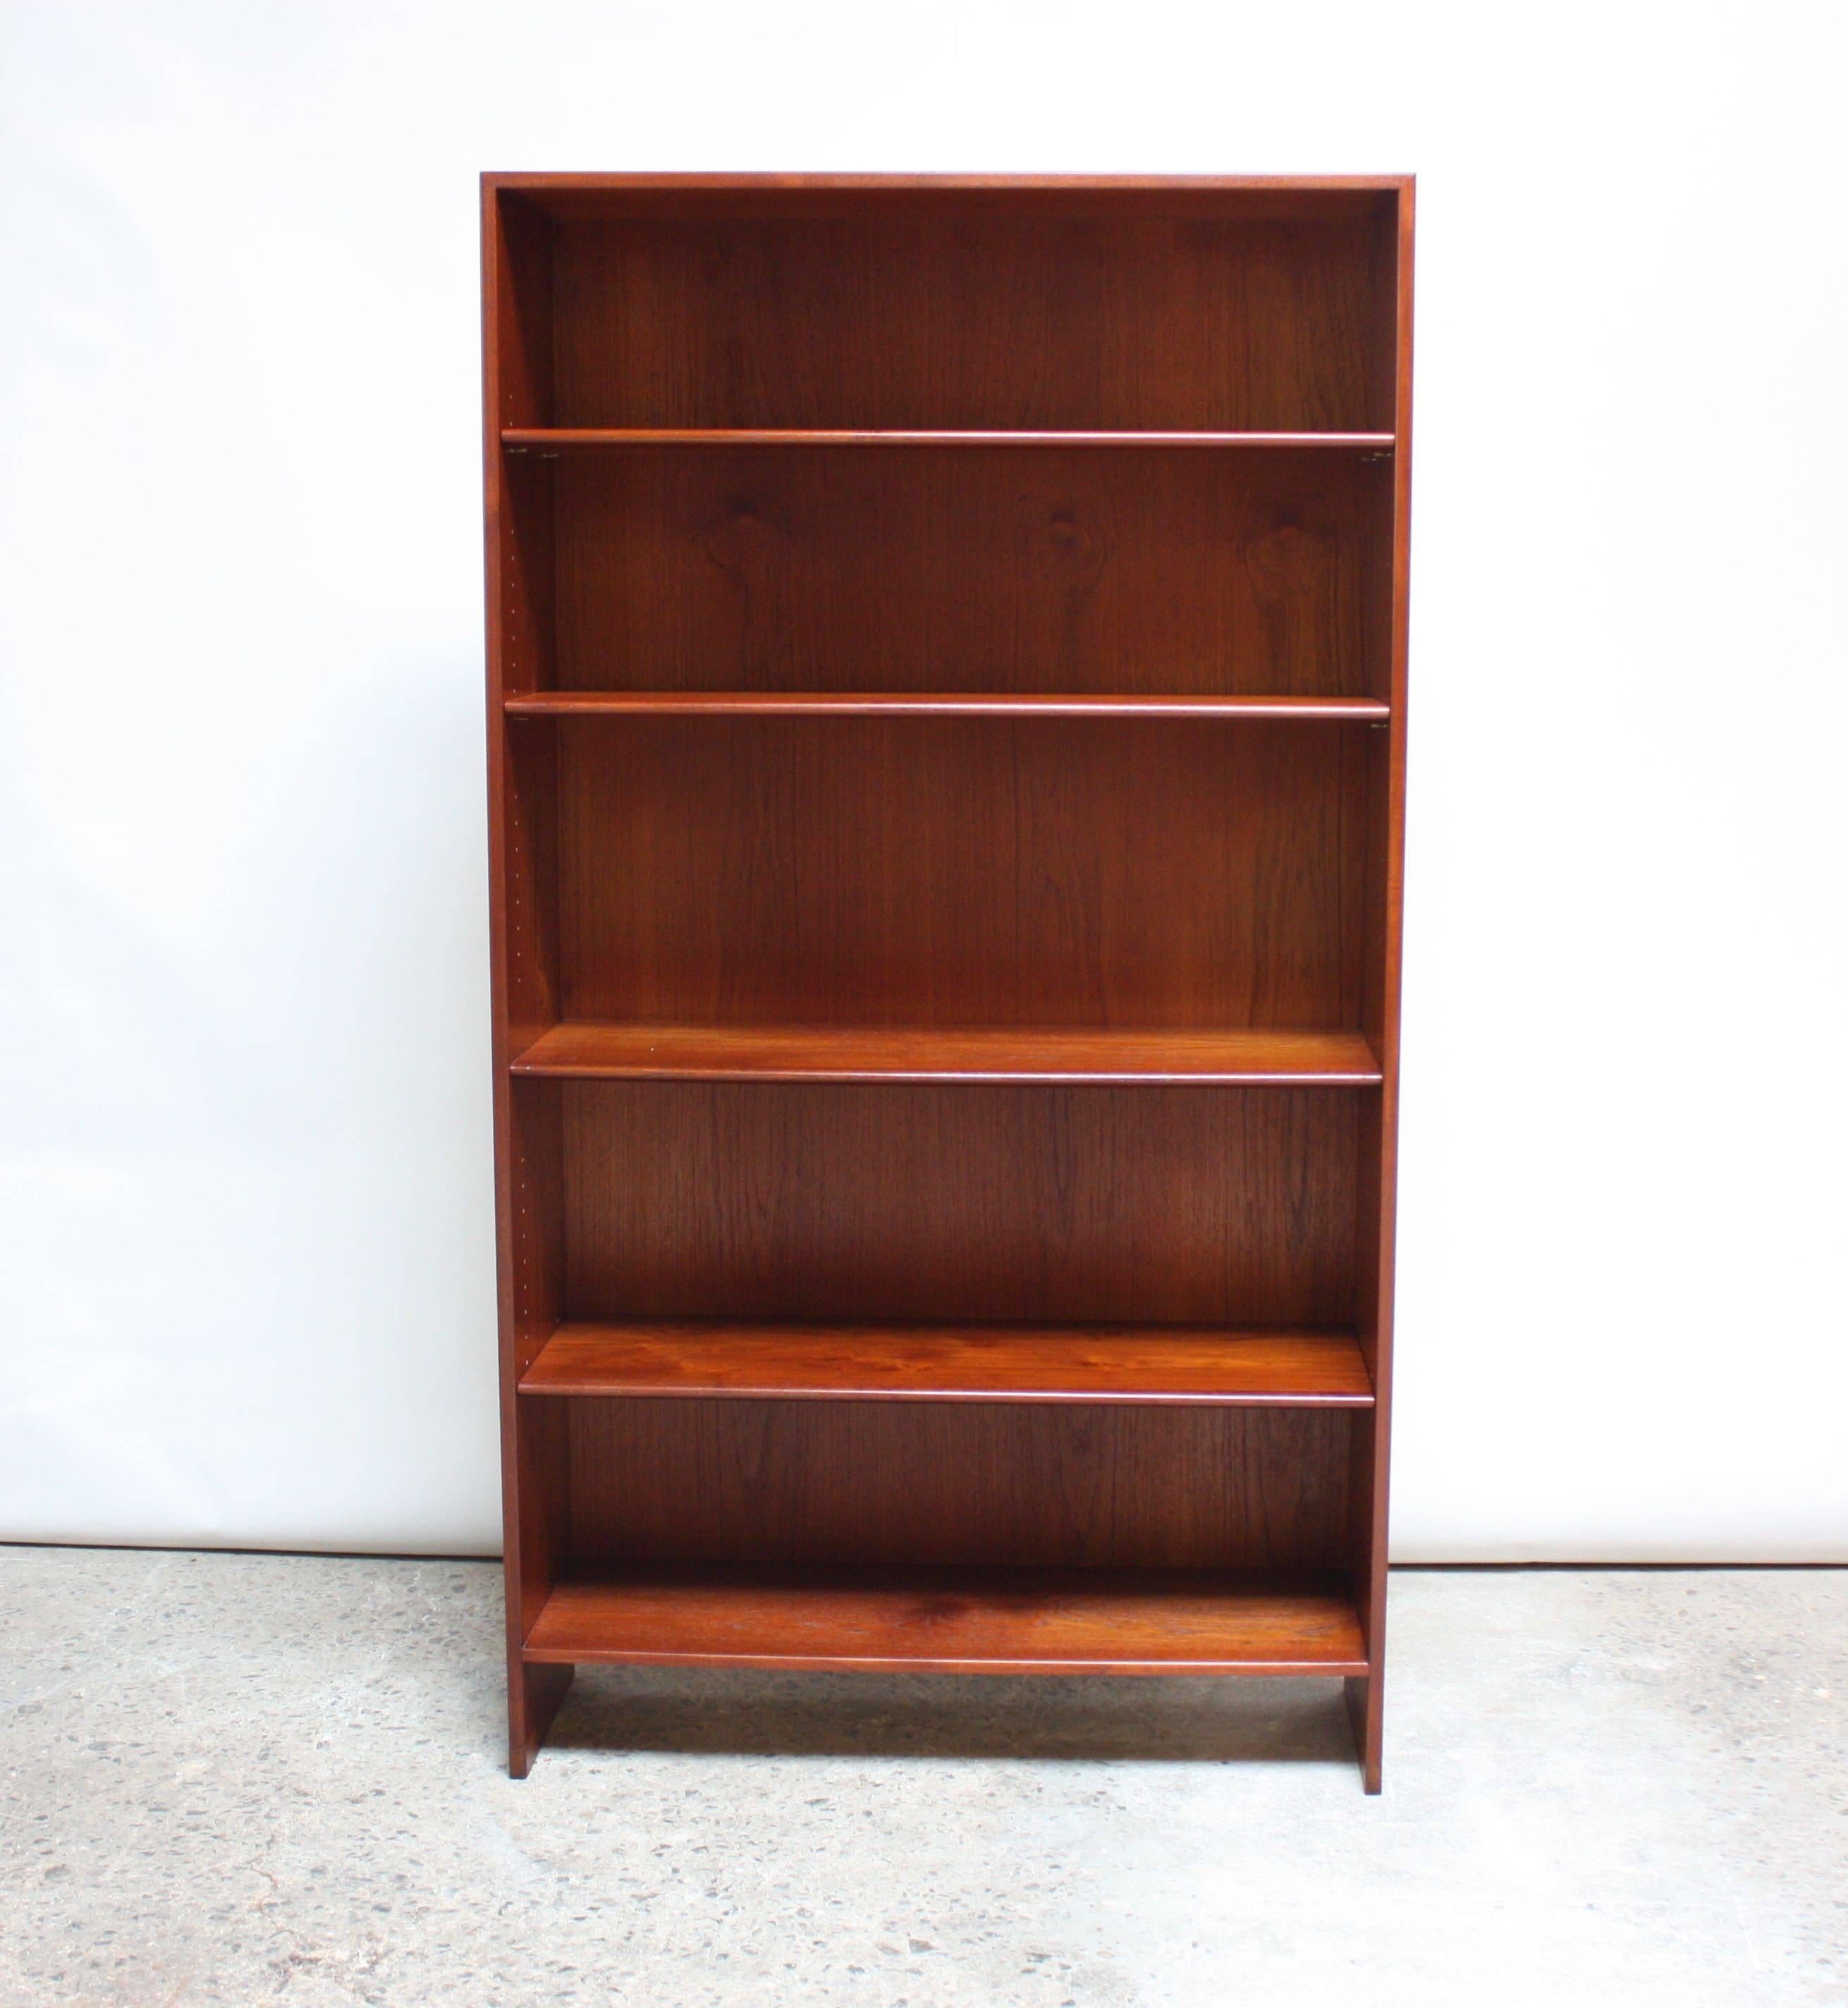 This free-standing bookshelf (model RY 8) was designed by Hans Wegner for Ry Mobler. The more ubiquitous early 1950s examples were made of oak; this lesser seen teak version boasting vivid grain and rich color was manufactured in 1959. Three of the